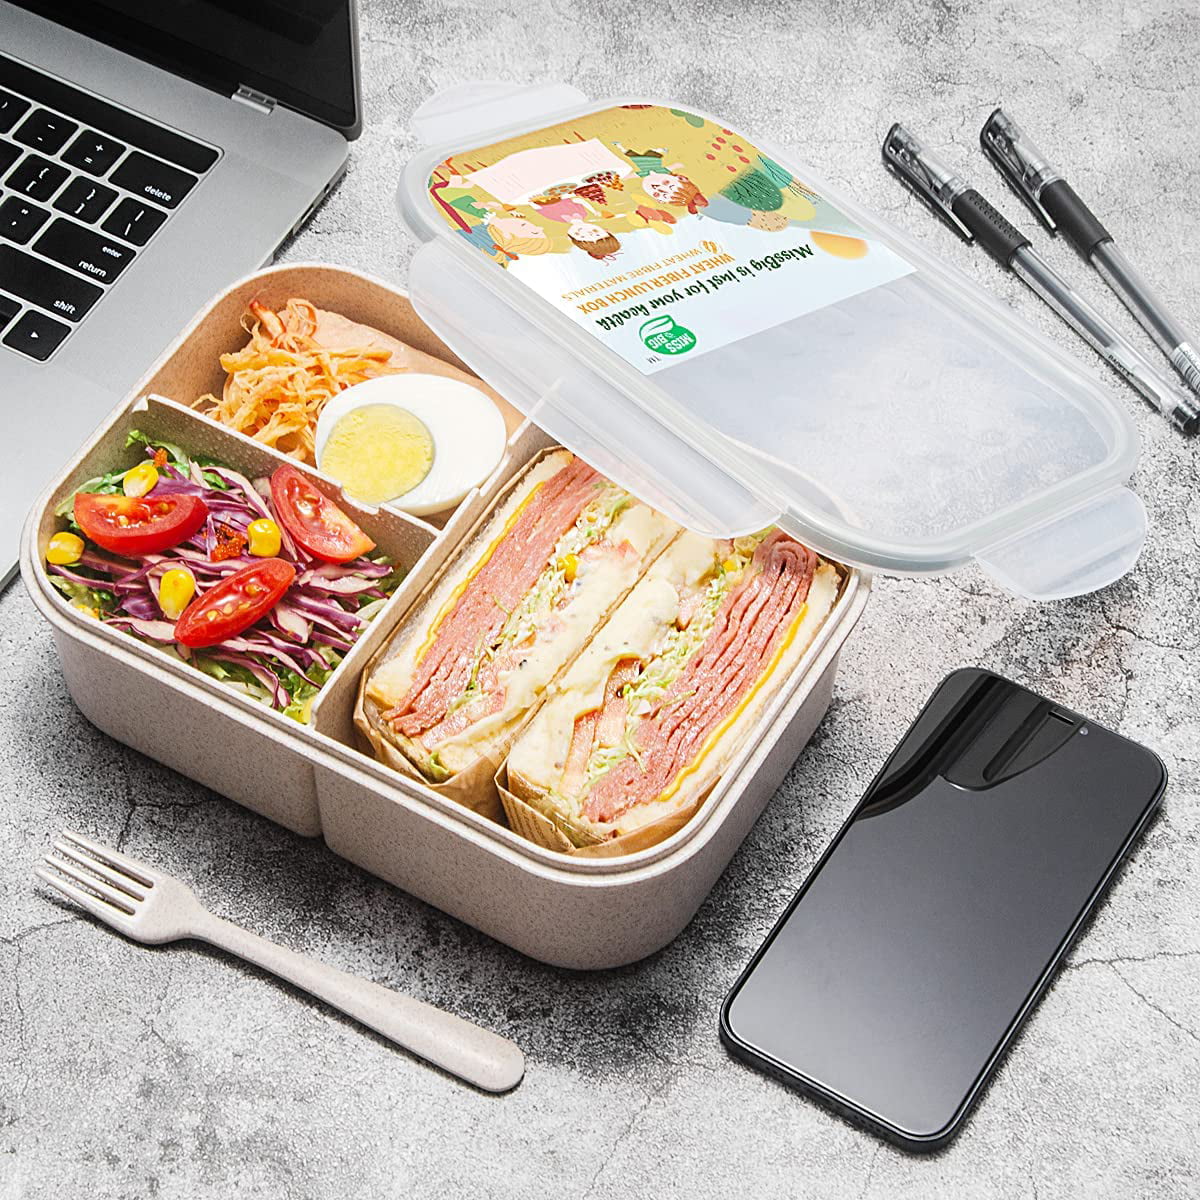 Lnkoo Kids Bento Box,1400ml Leakproof Lunch Containers Cute Lunch Boxes for Kids with Utensils & Dividers Bento Boxes for Adults, Dishwasher 